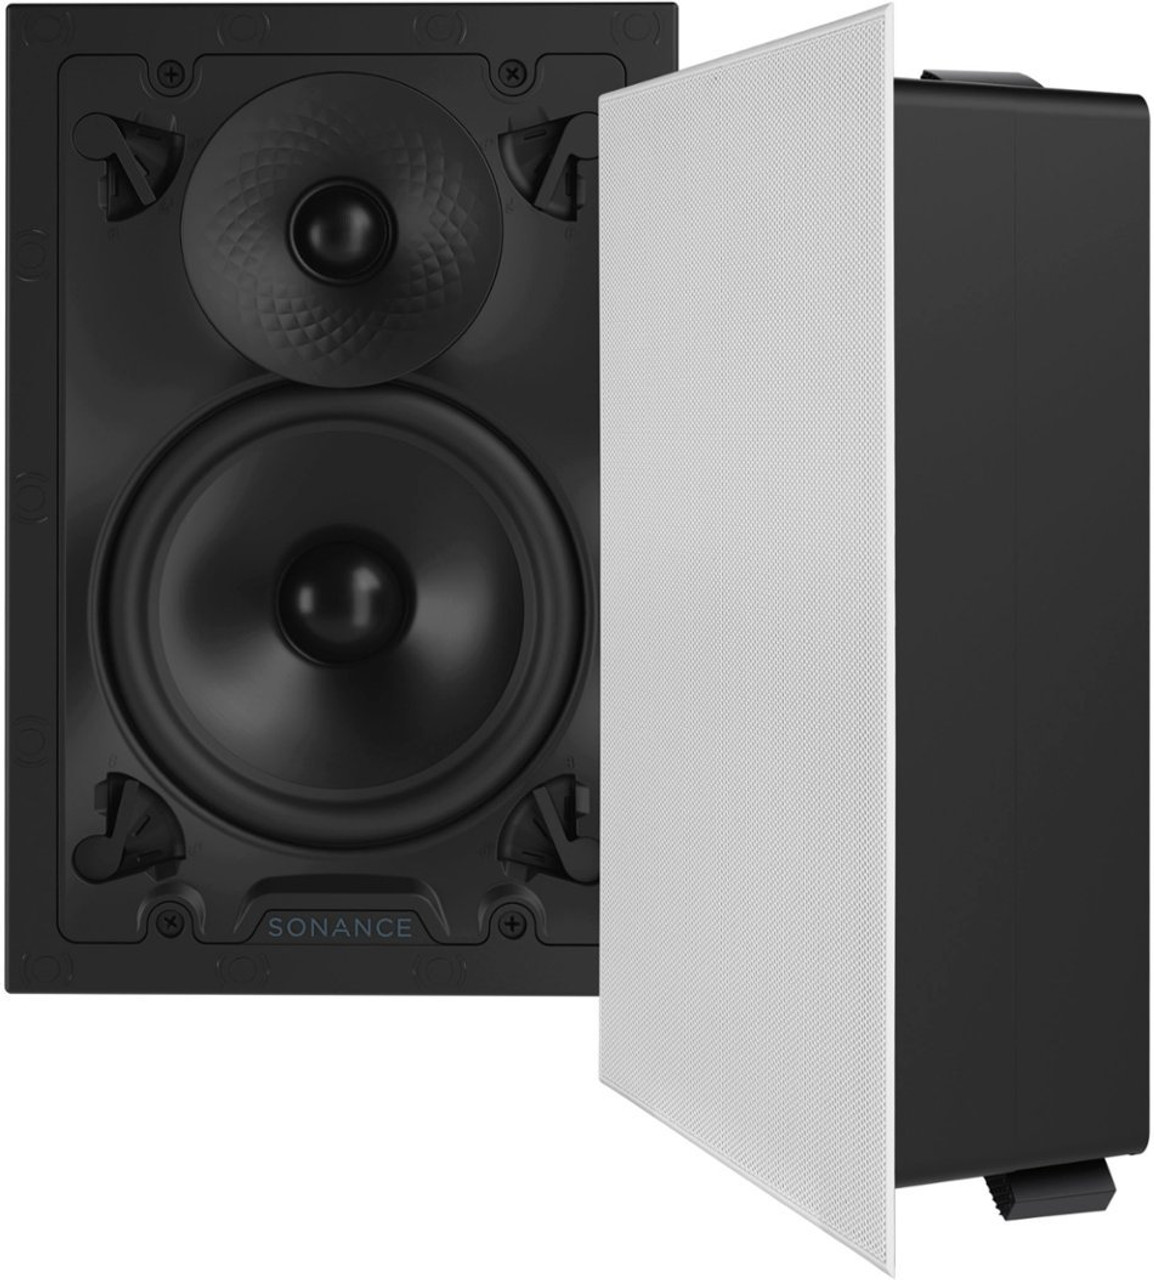 Sonance VX62 6.5" In-Wall Rectangle Speakers (Pair)